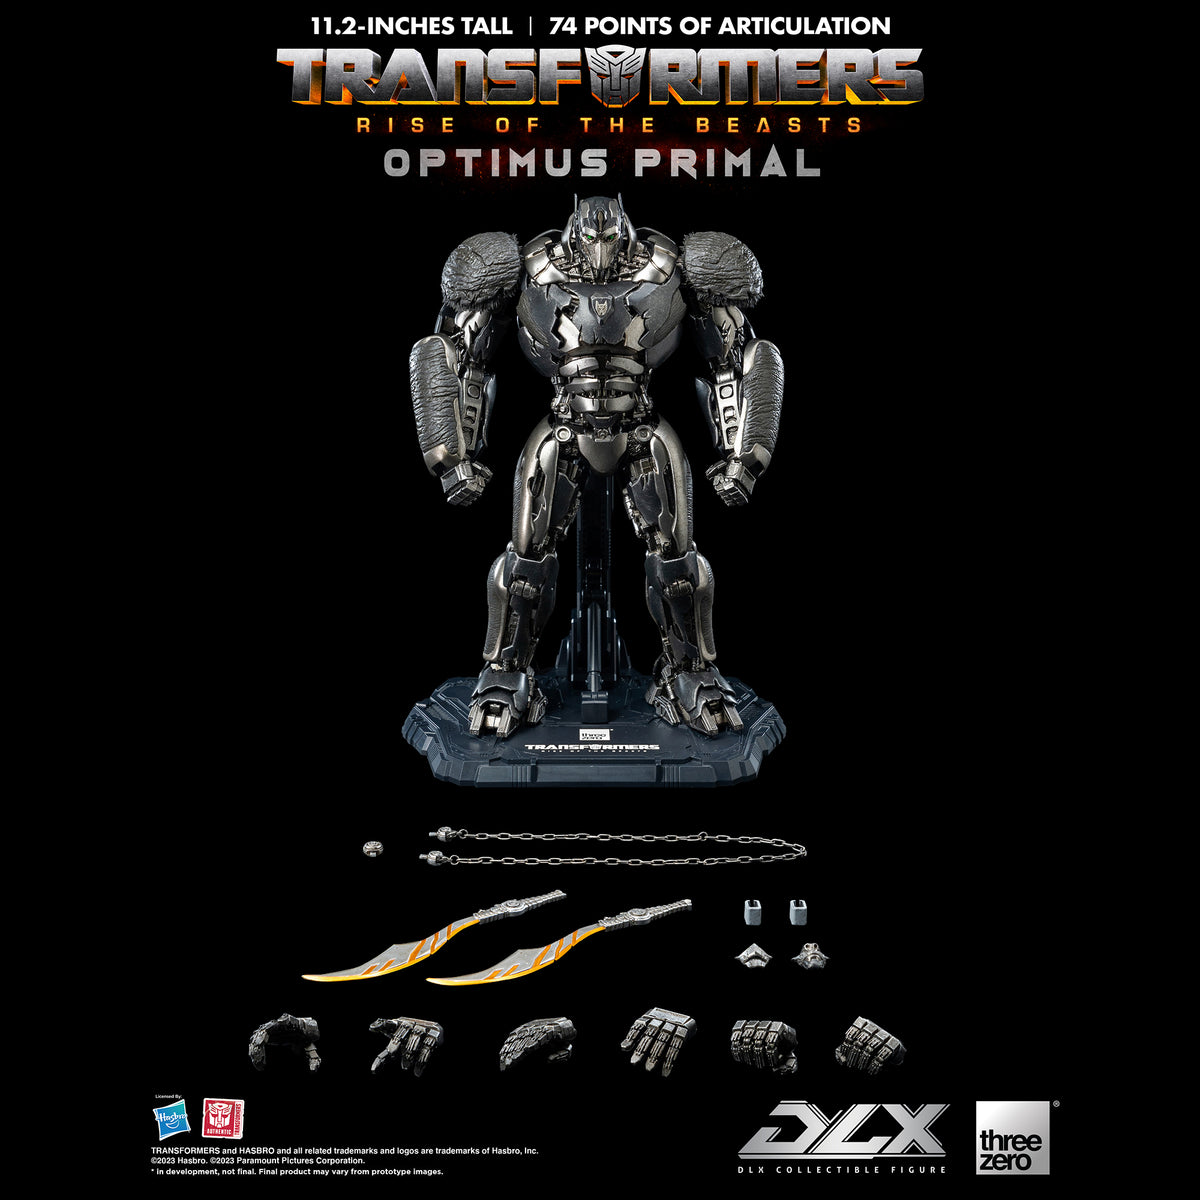 Transformers: Rise of the Beasts Deluxe Class Bumblebee – Hasbro Pulse - EU